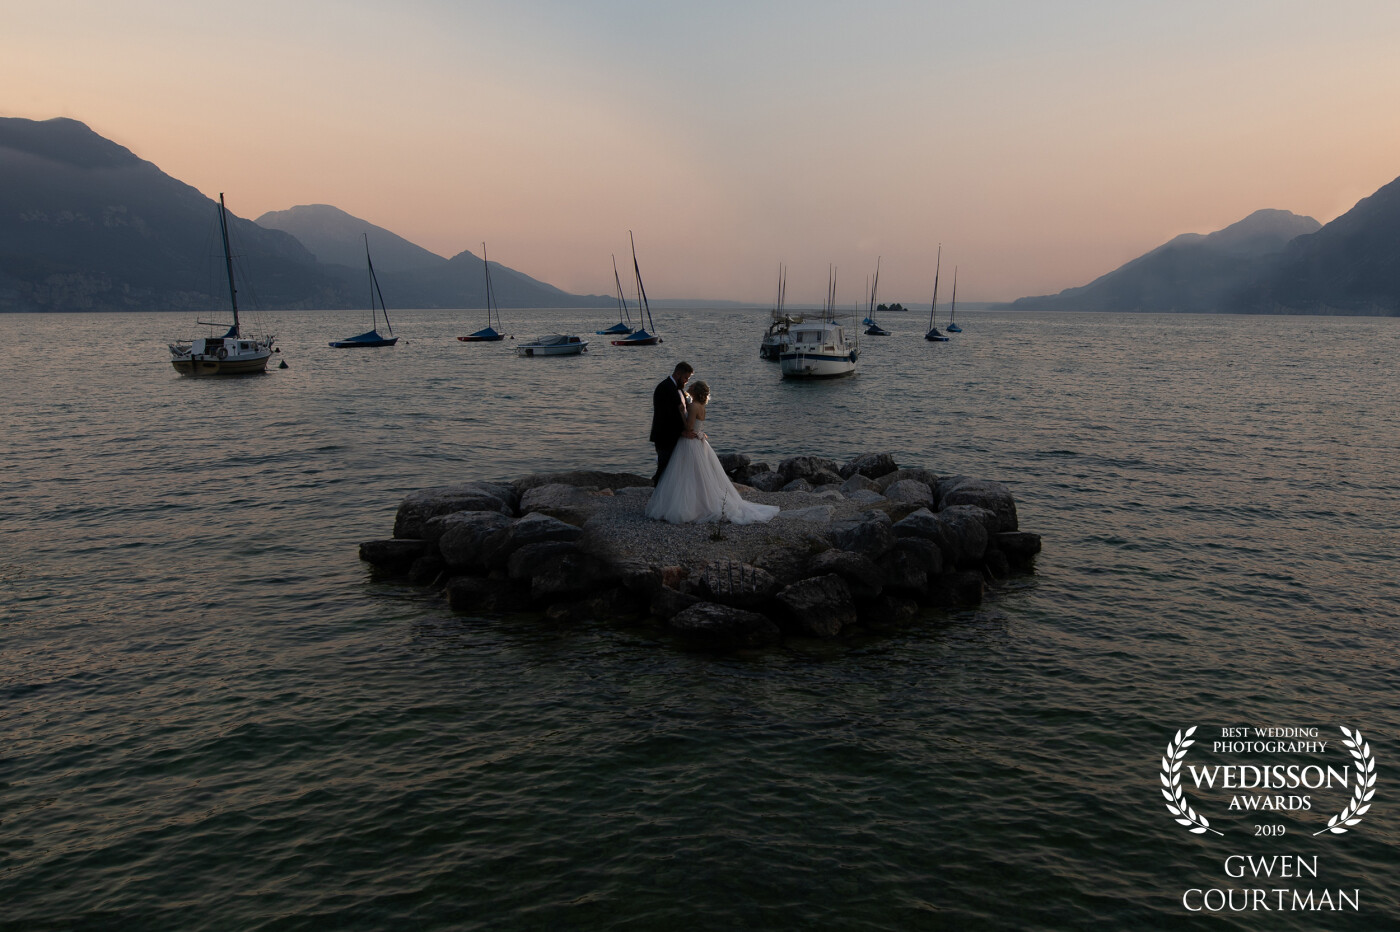 This image was taken in Italy in Malcesine, Lake Garda. It was such fun creating this image of Anna and Dan, who traveled from the Uk for the wedding.